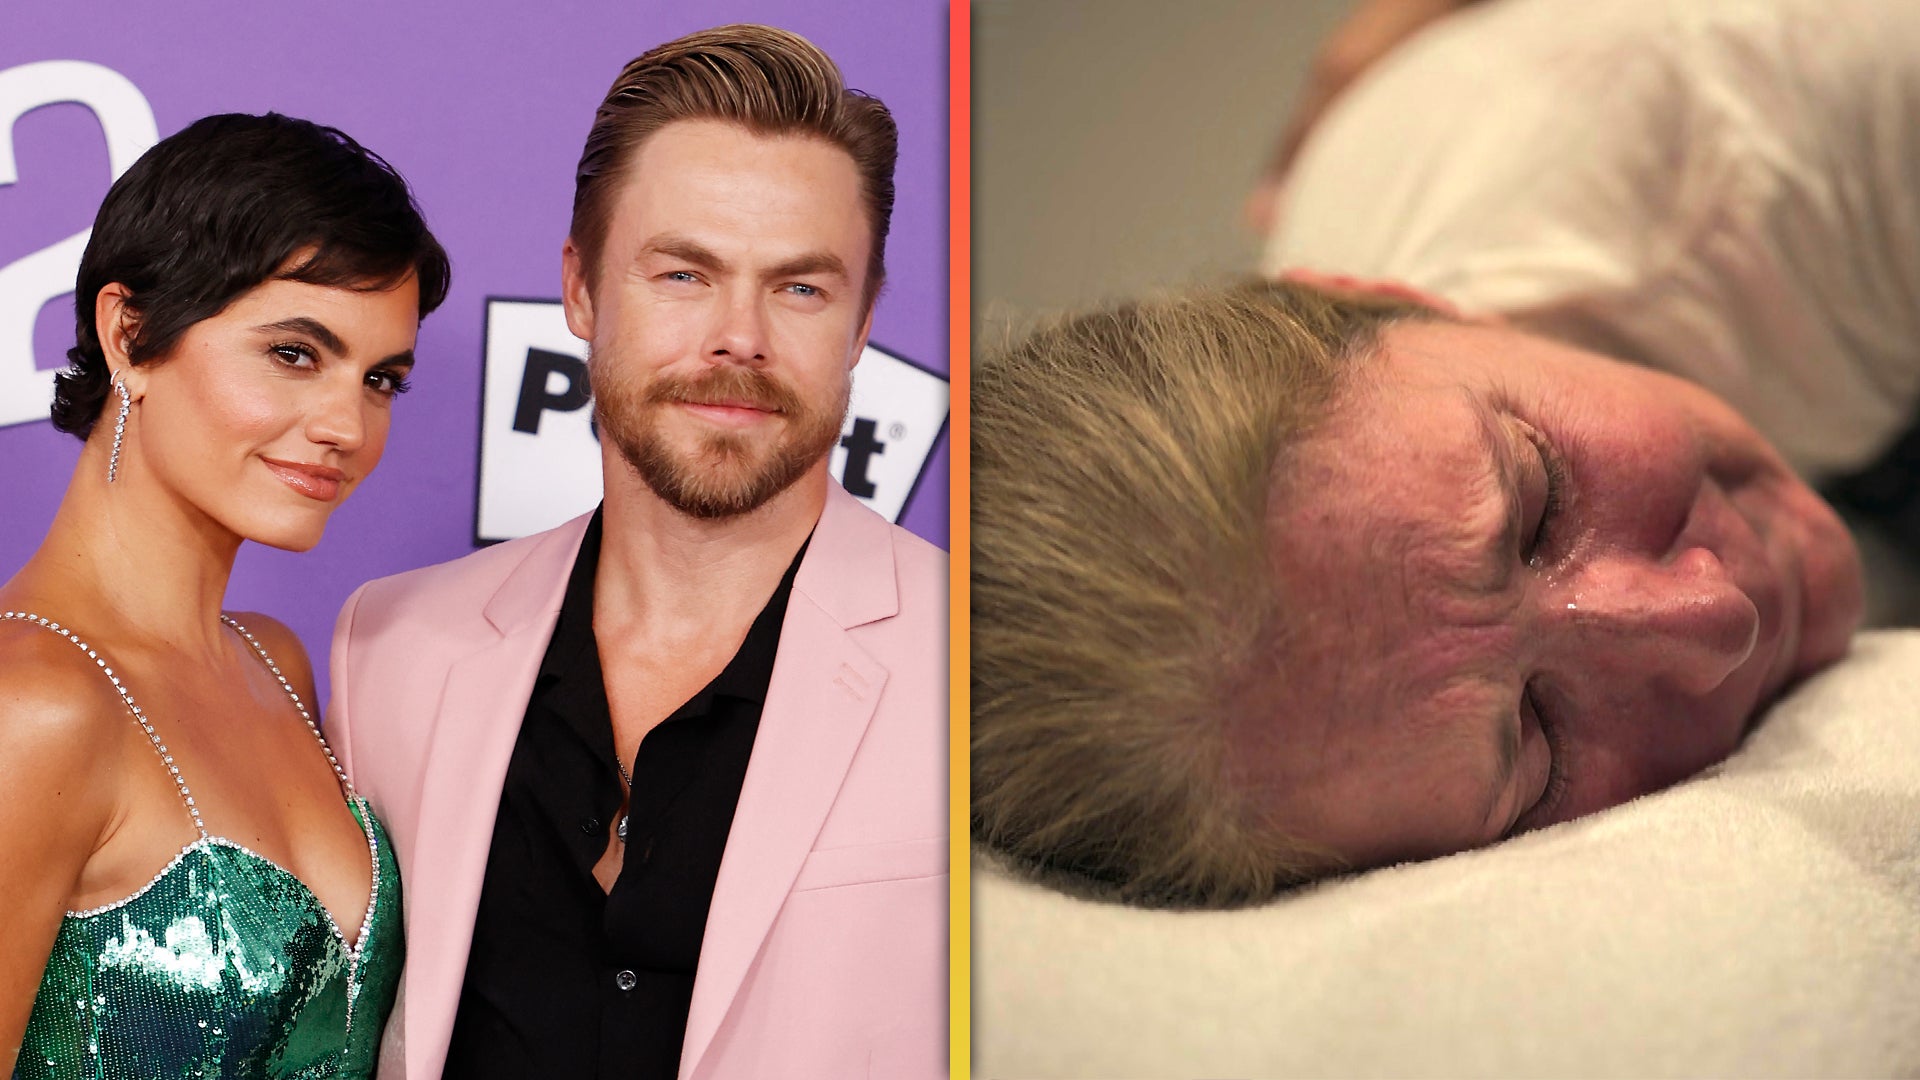 Derek Hough Says He Could 'Barely Watch' Celine Dion Doc After Wife Hayley's Seizure